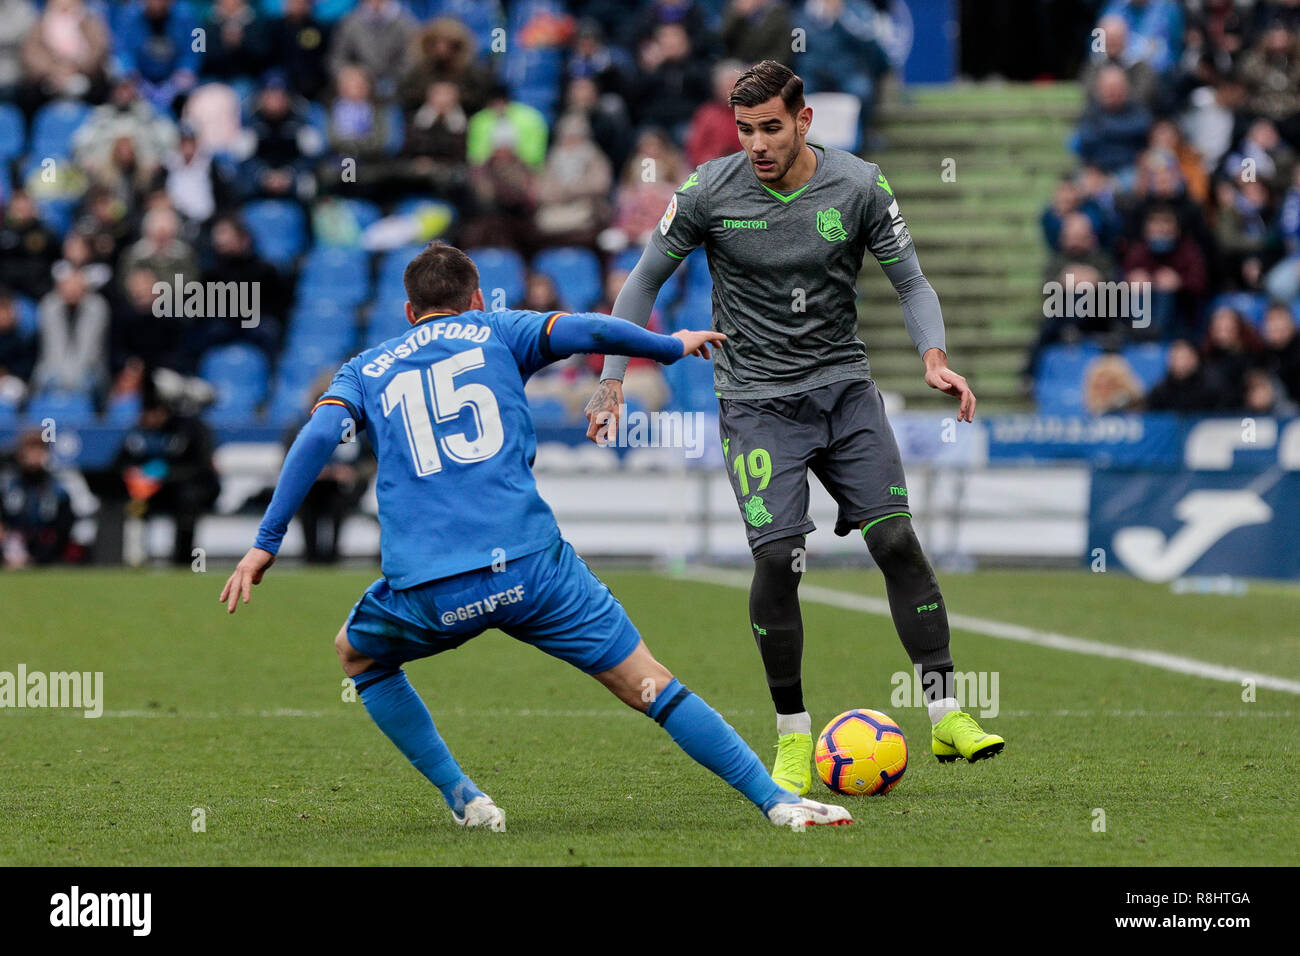 Getafe CF's Sebastian Cristoforo and Real Sociedad's Theo Hernandez are seen in action during the La Liga football match between Getafe CF and Real Sociedad at the Coliseum Alfonso Perez in Getafe, Spain. ( Final score; Getafe CF 1:0 Real Sociedad ) Stock Photo